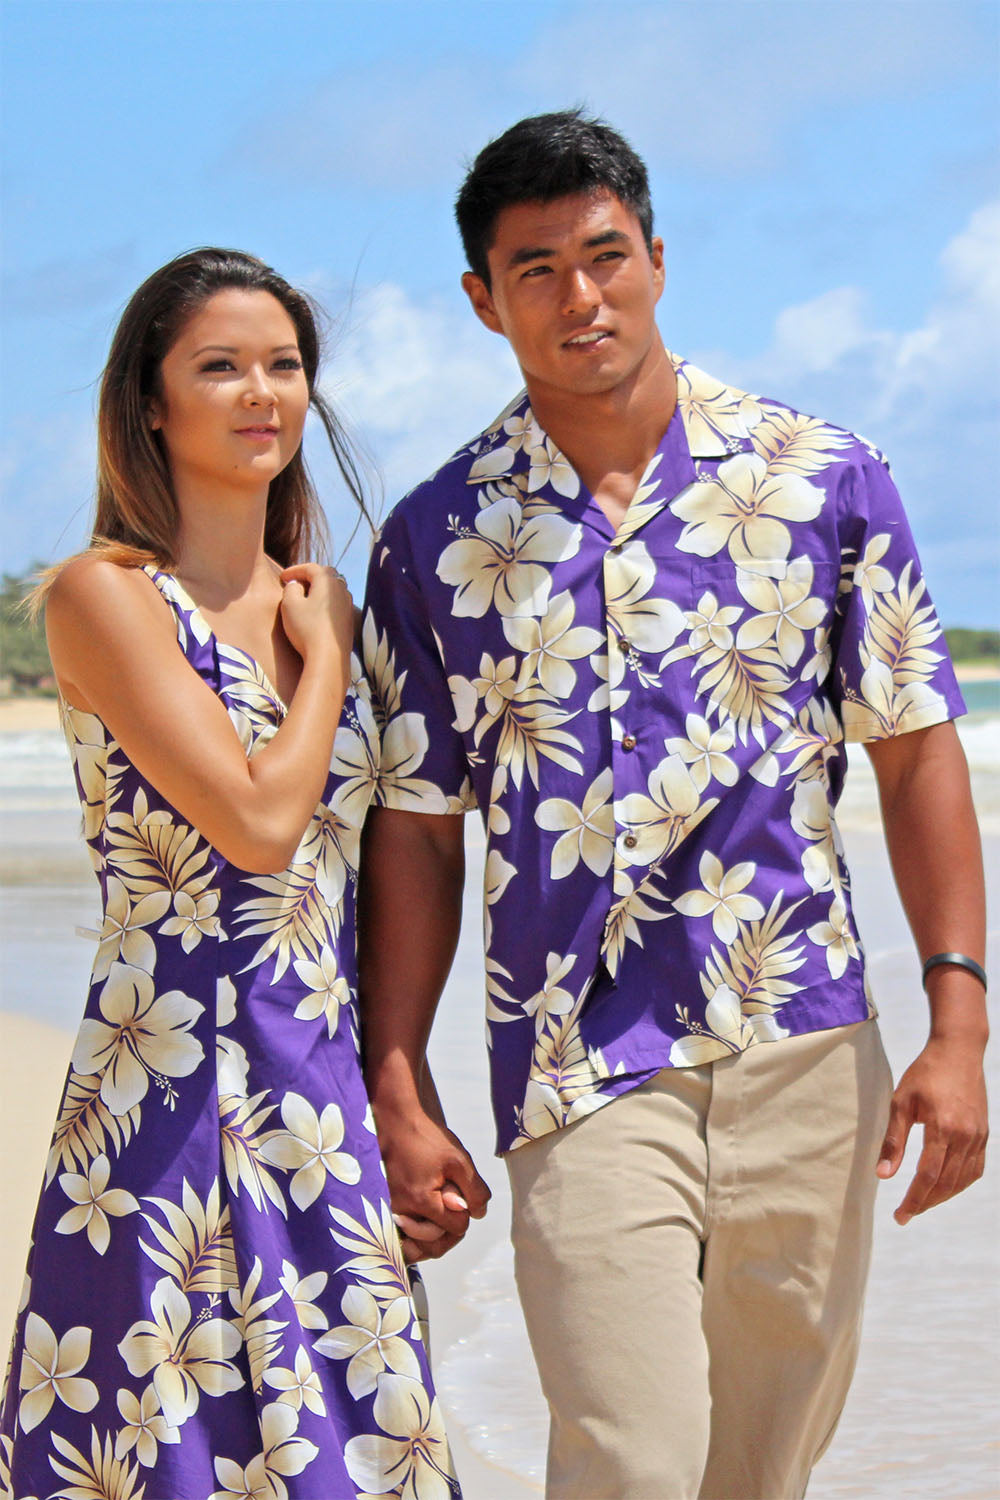 Mike and Ashlee in matching Tropic Fever Aloha shirt and dress